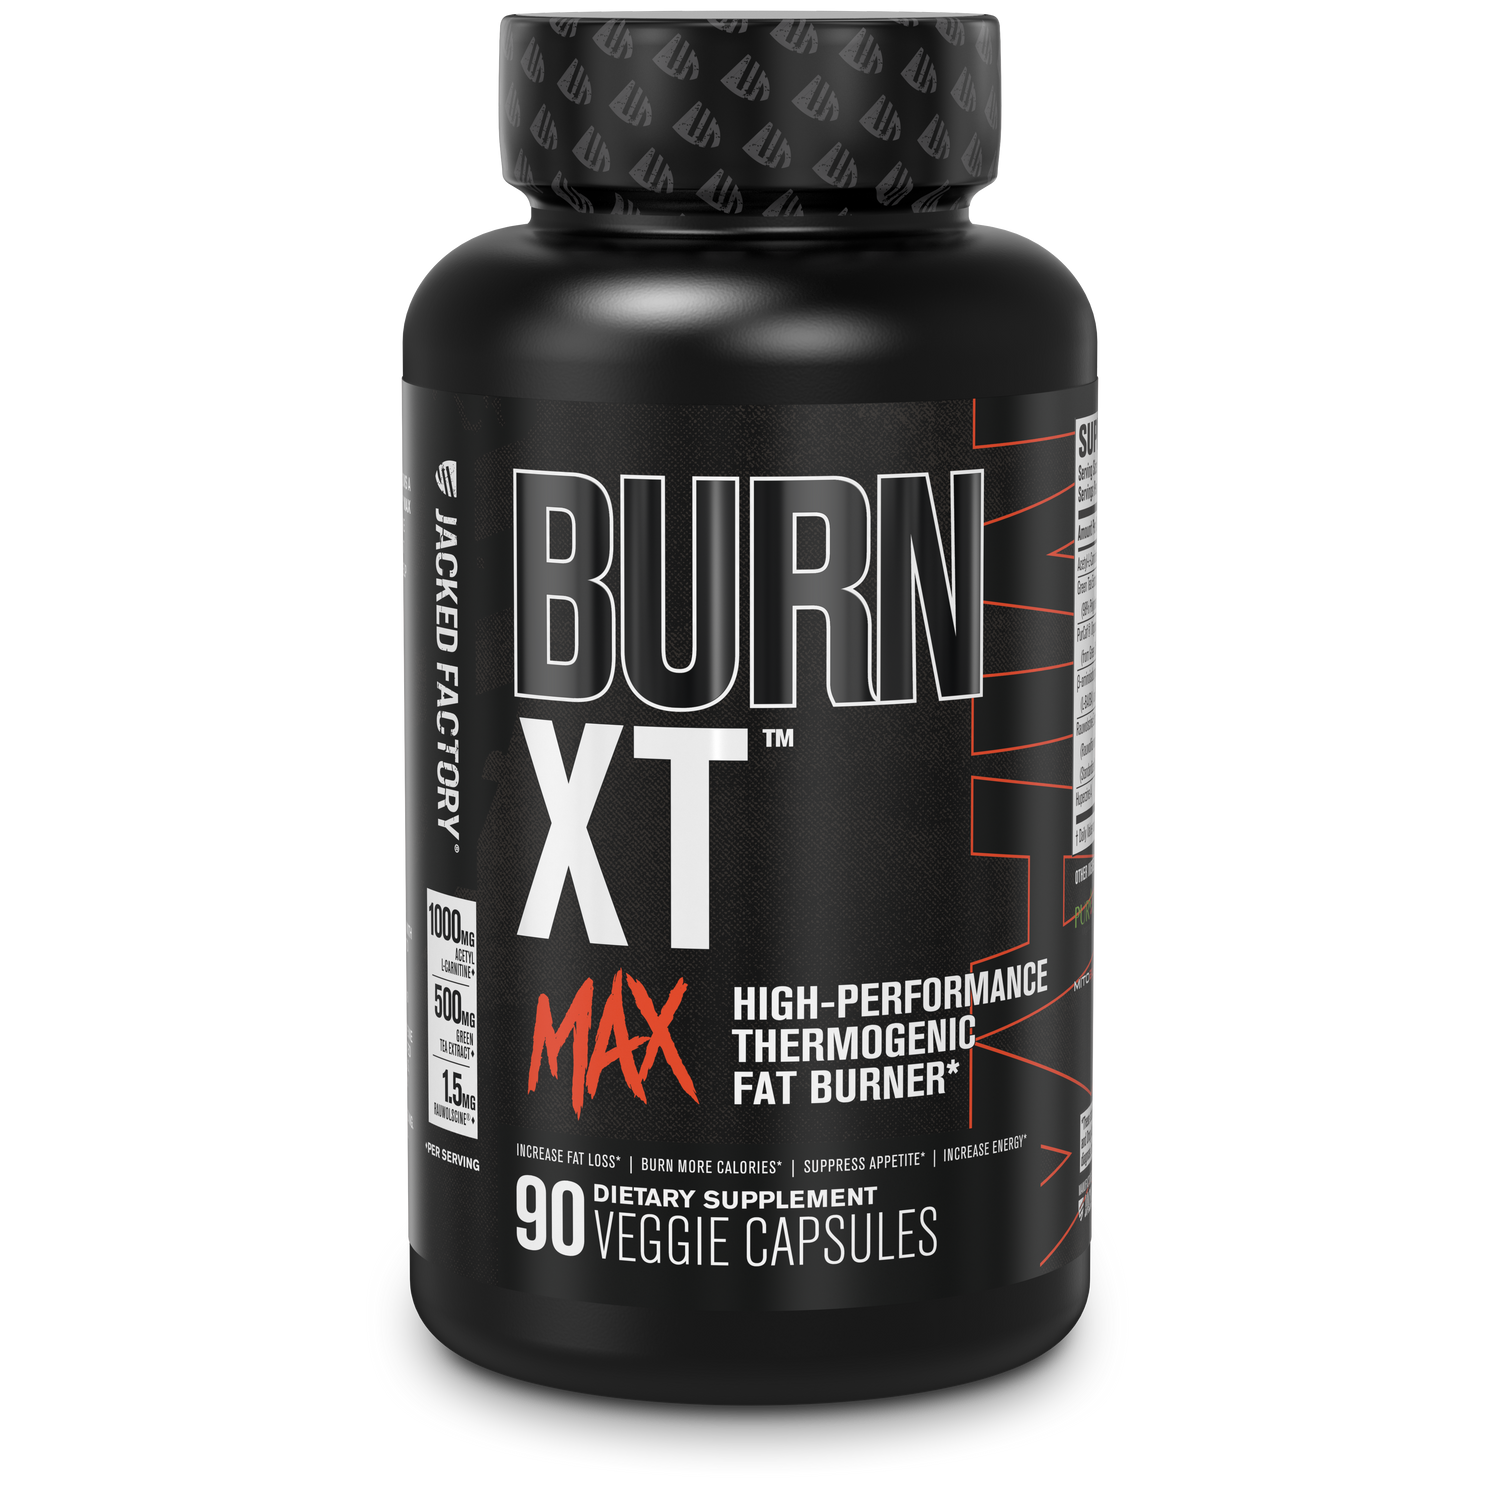 Black bottle with orange text of Jacked Factory's Burn-XT Max product